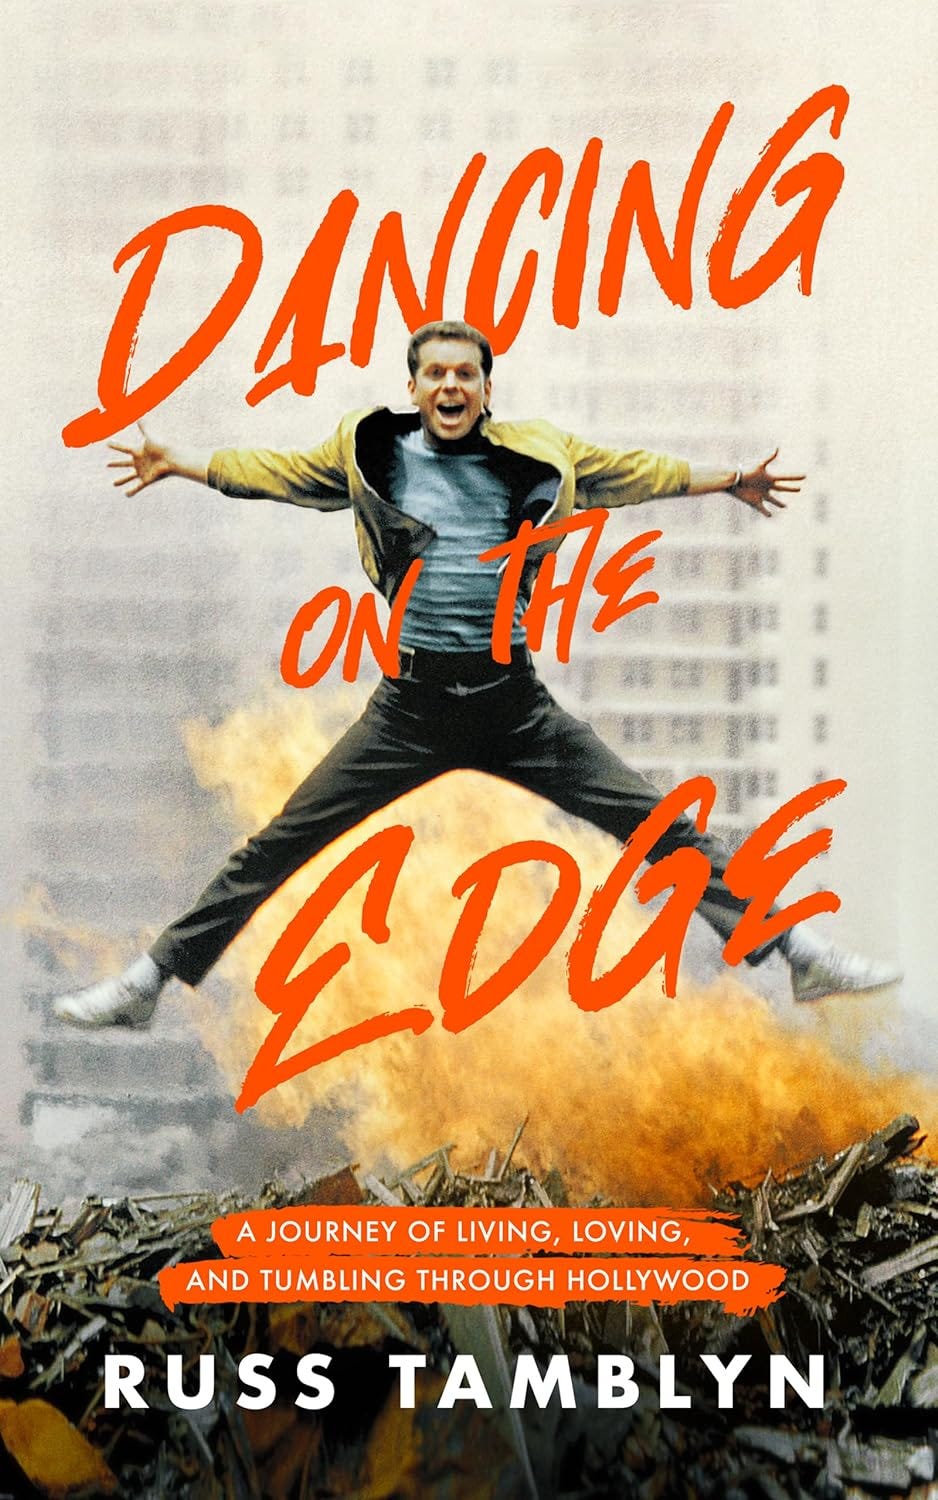 The book cover for "Dancing on the Edge: A Journey of Living, Loving, and Tumbling through Hollywood" by Russ Tamblyn.